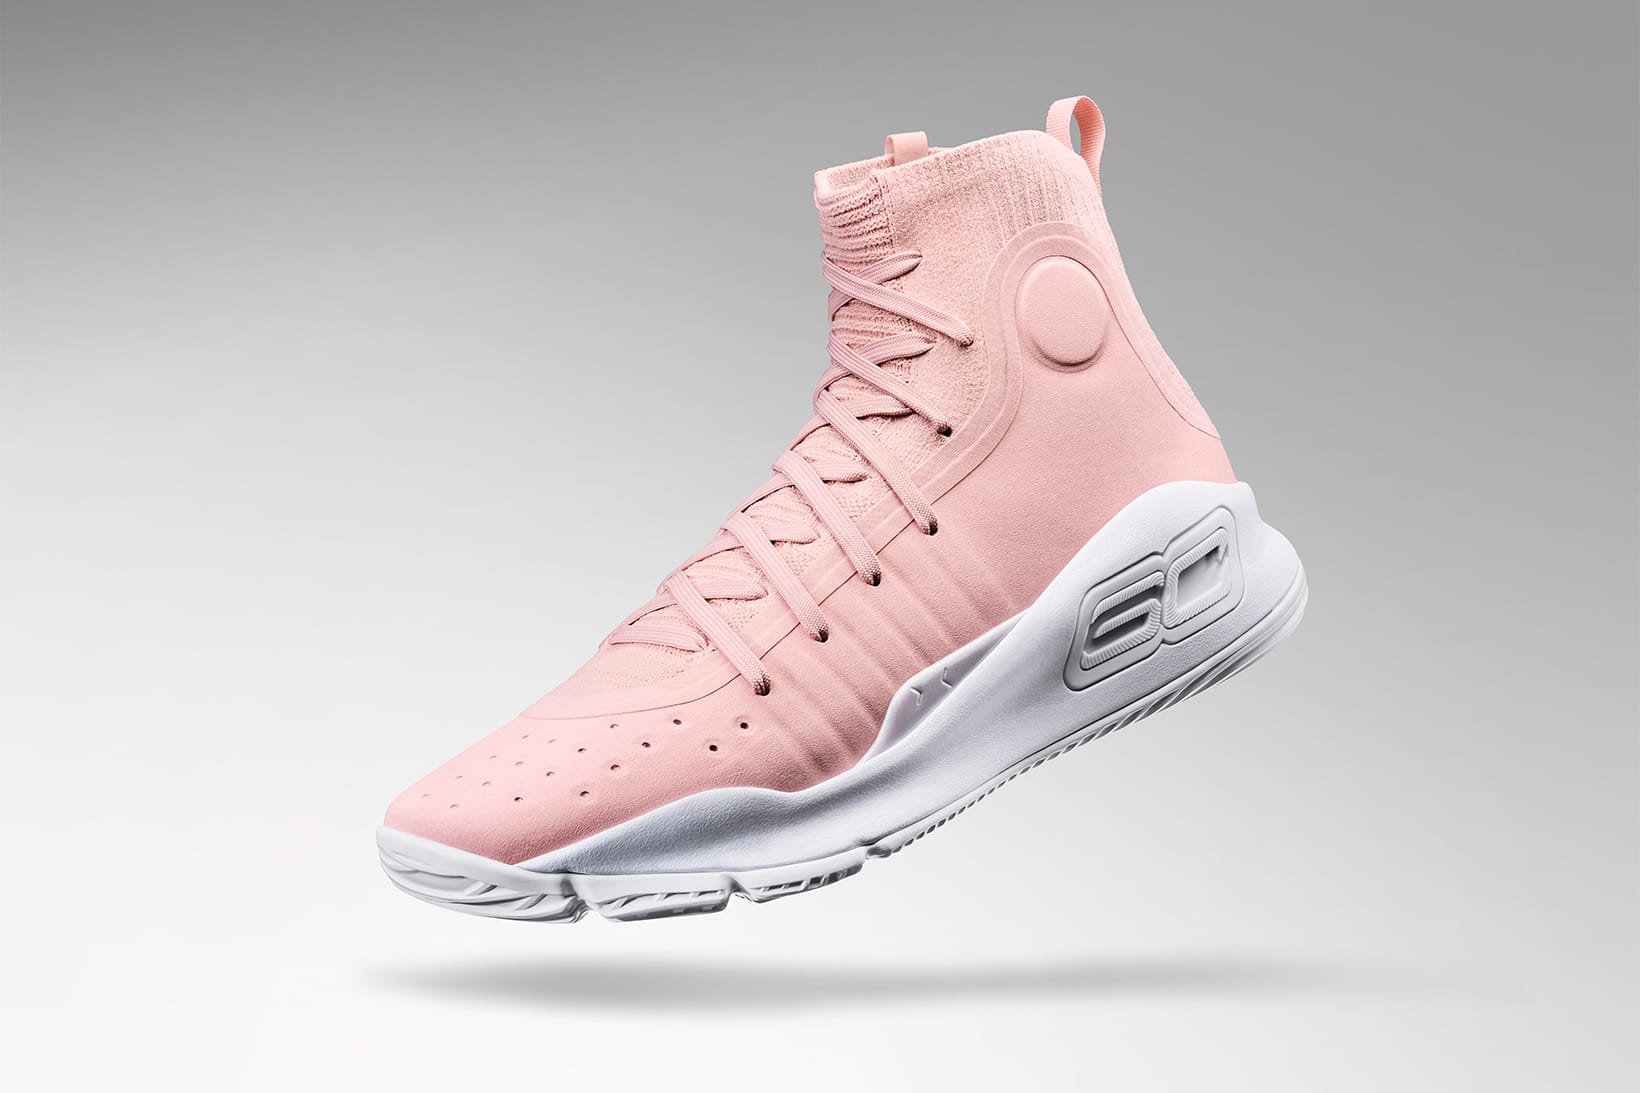 Under Armour Curry 4 Flushed Pink for 